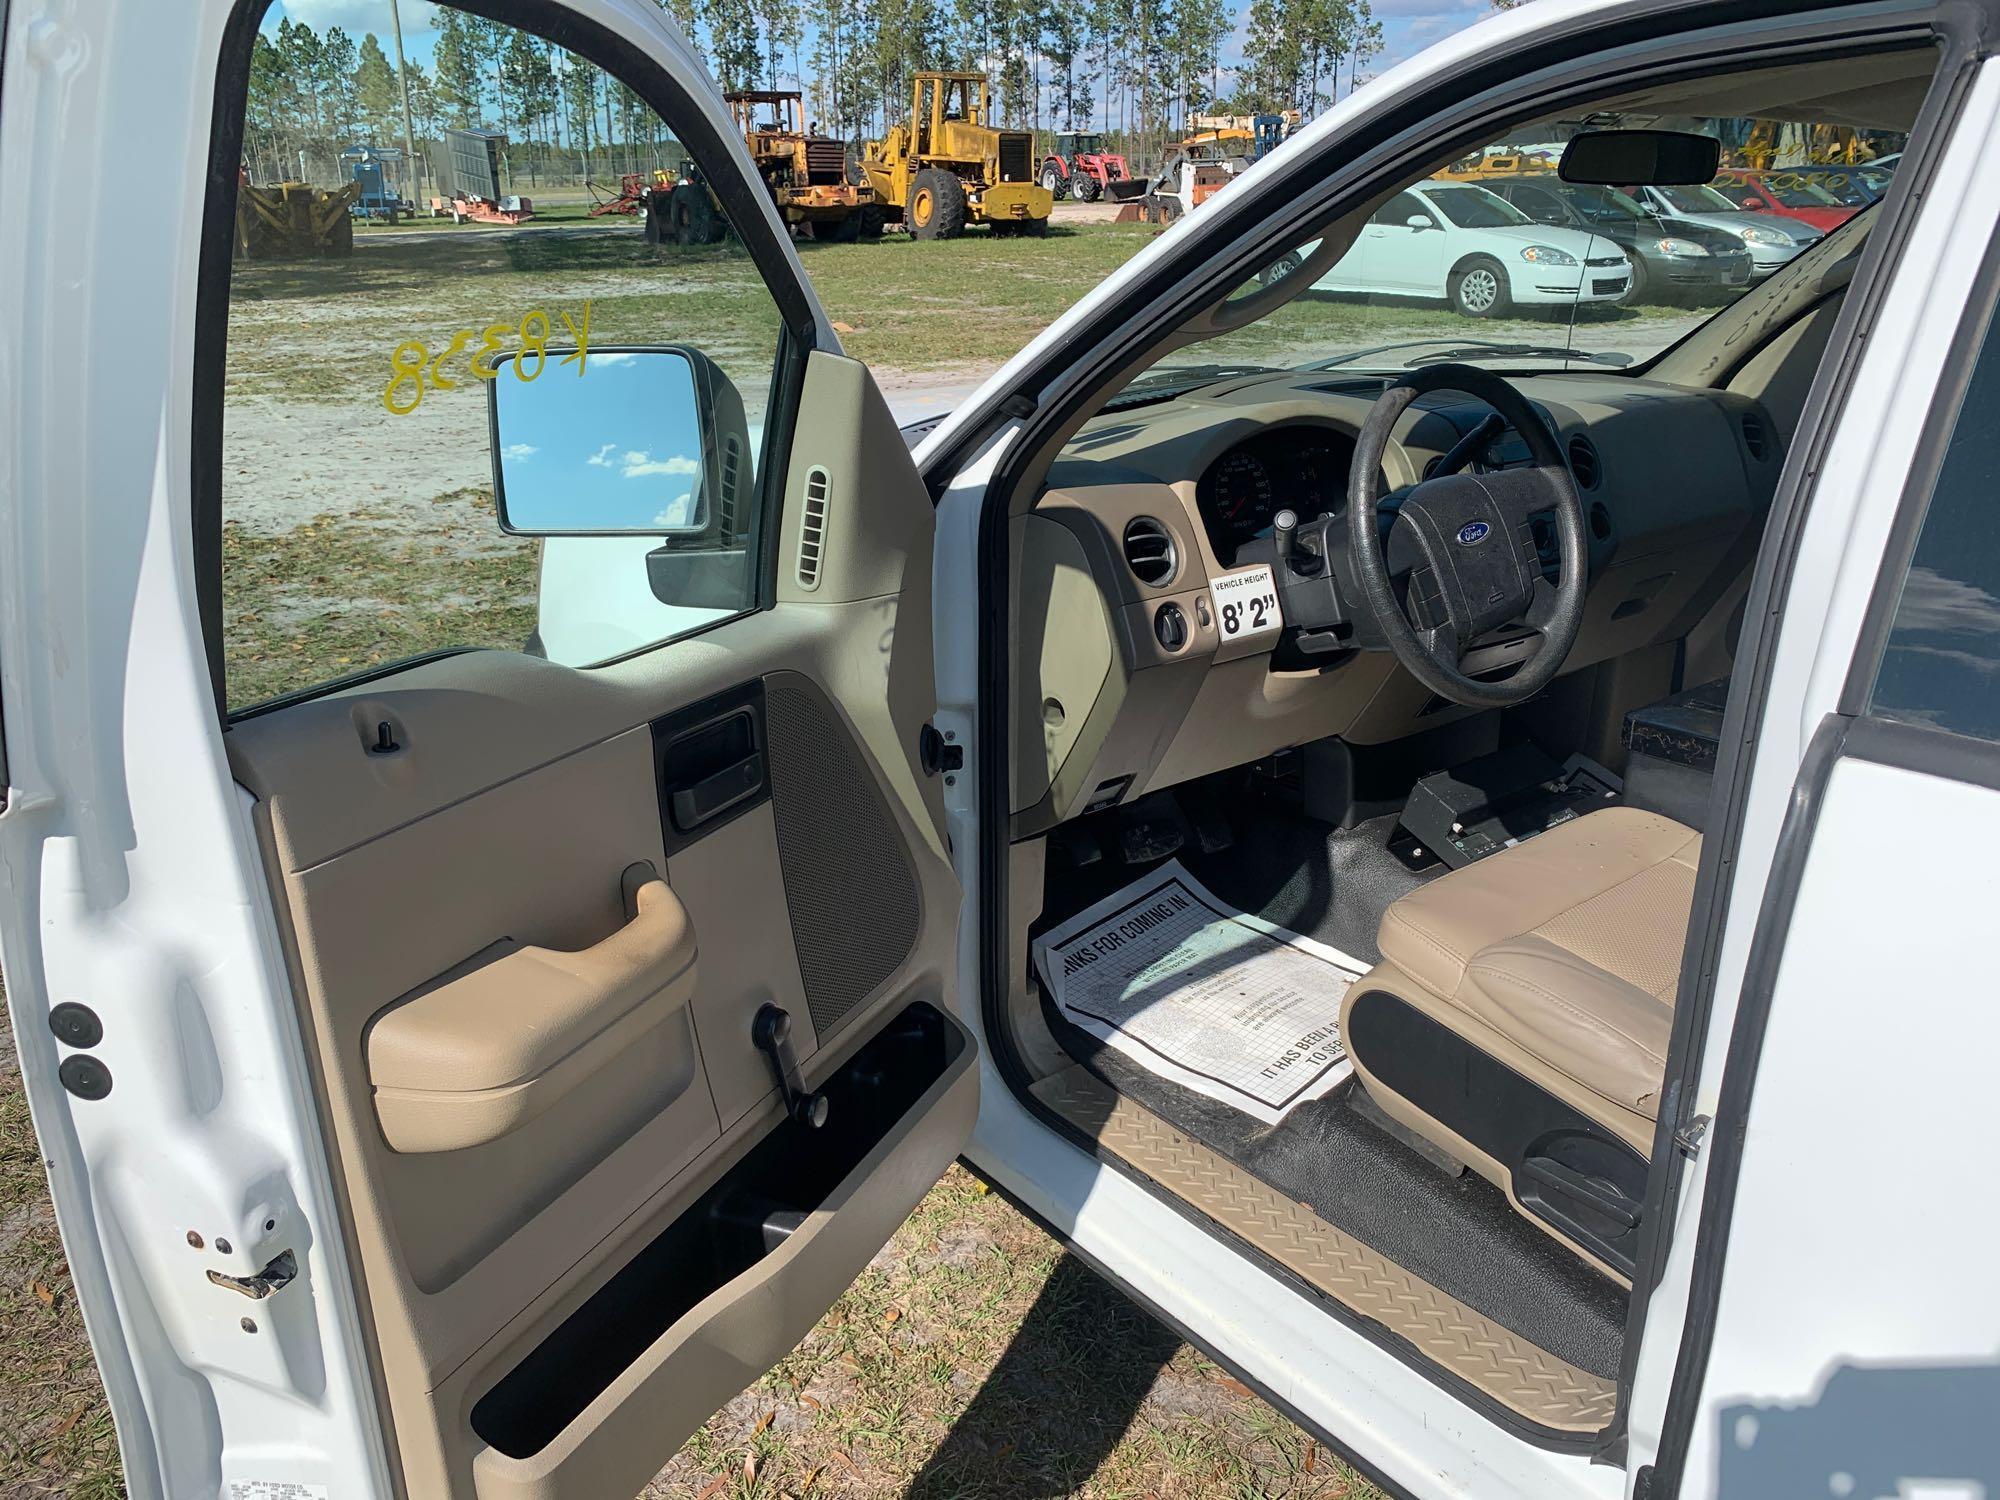 2008 Ford F-150 Enclosed Topper Pickup Truck